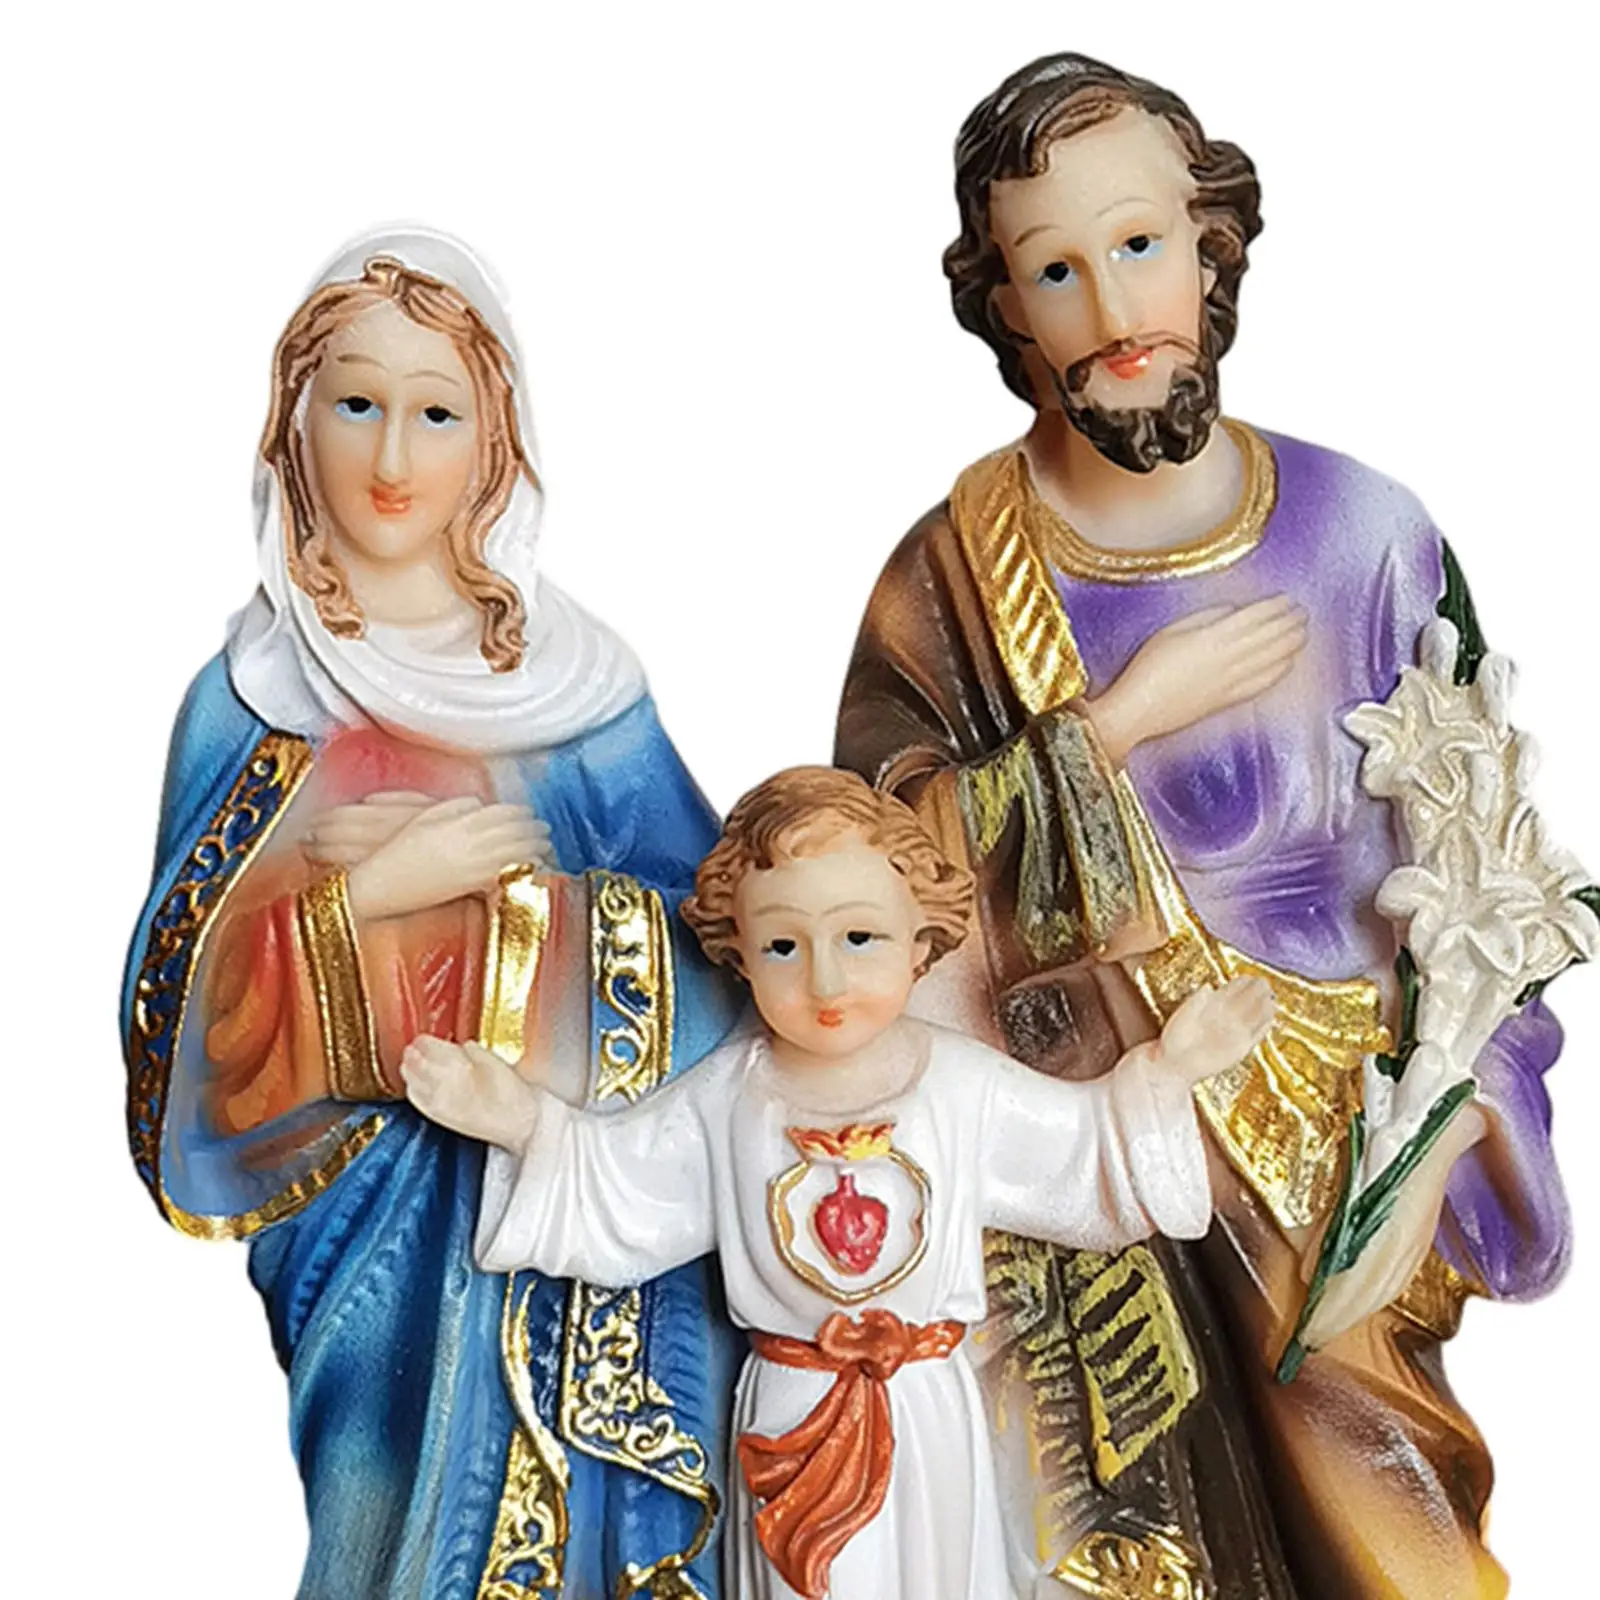 Holy Family Figure Holy Family Figures Decor, Resin Traditional Crafts Religious Gift, Religious Sculpture for Car